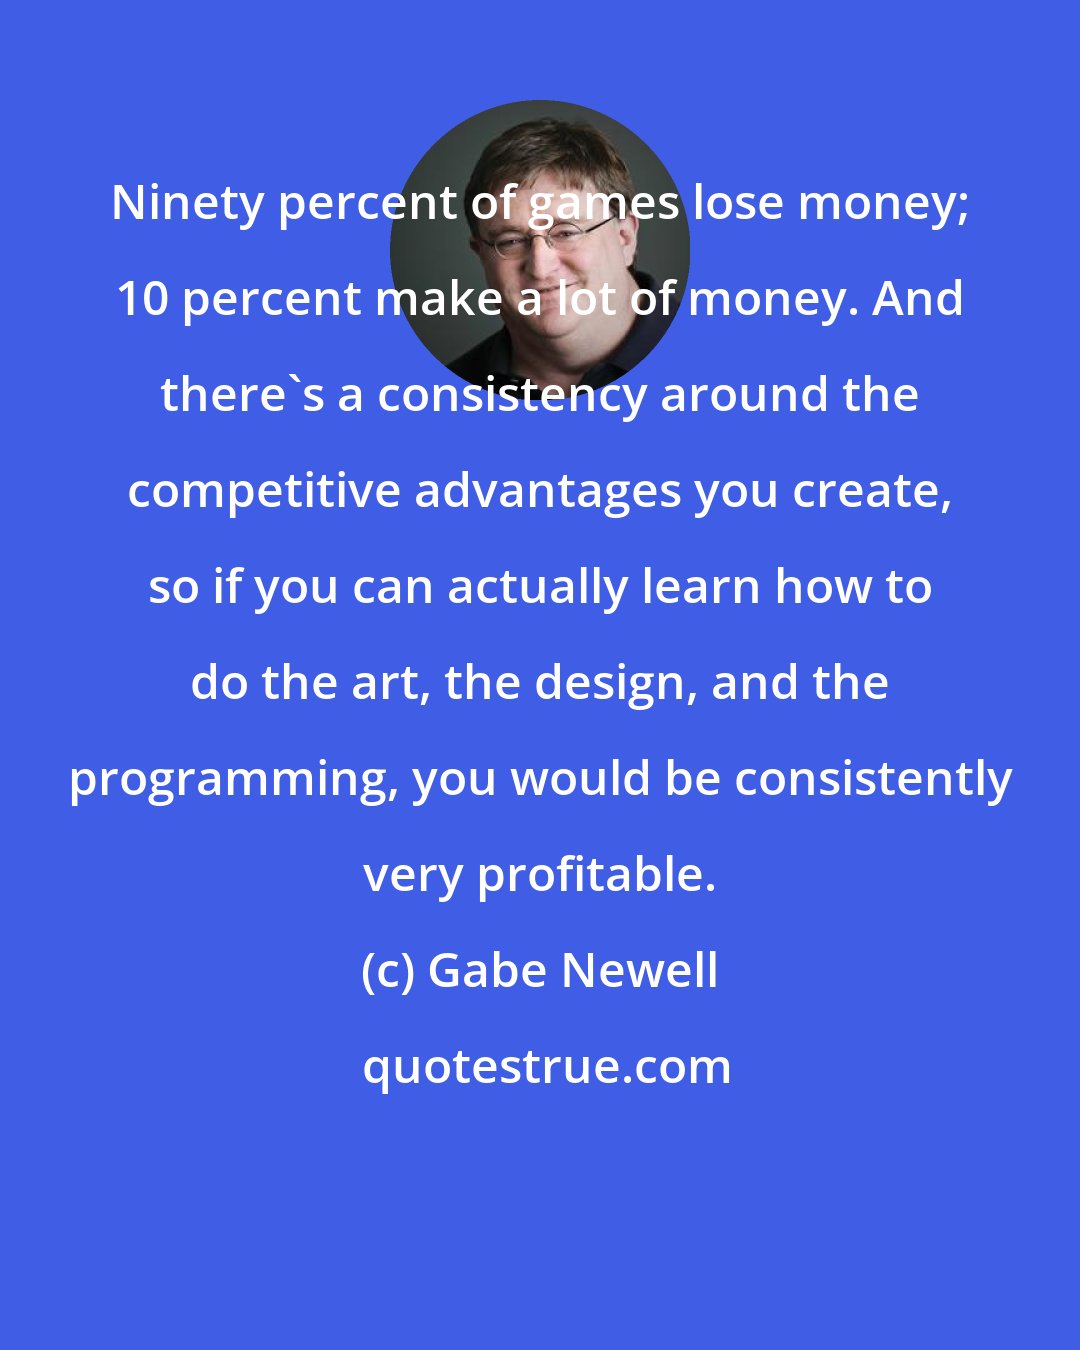 Gabe Newell: Ninety percent of games lose money; 10 percent make a lot of money. And there's a consistency around the competitive advantages you create, so if you can actually learn how to do the art, the design, and the programming, you would be consistently very profitable.